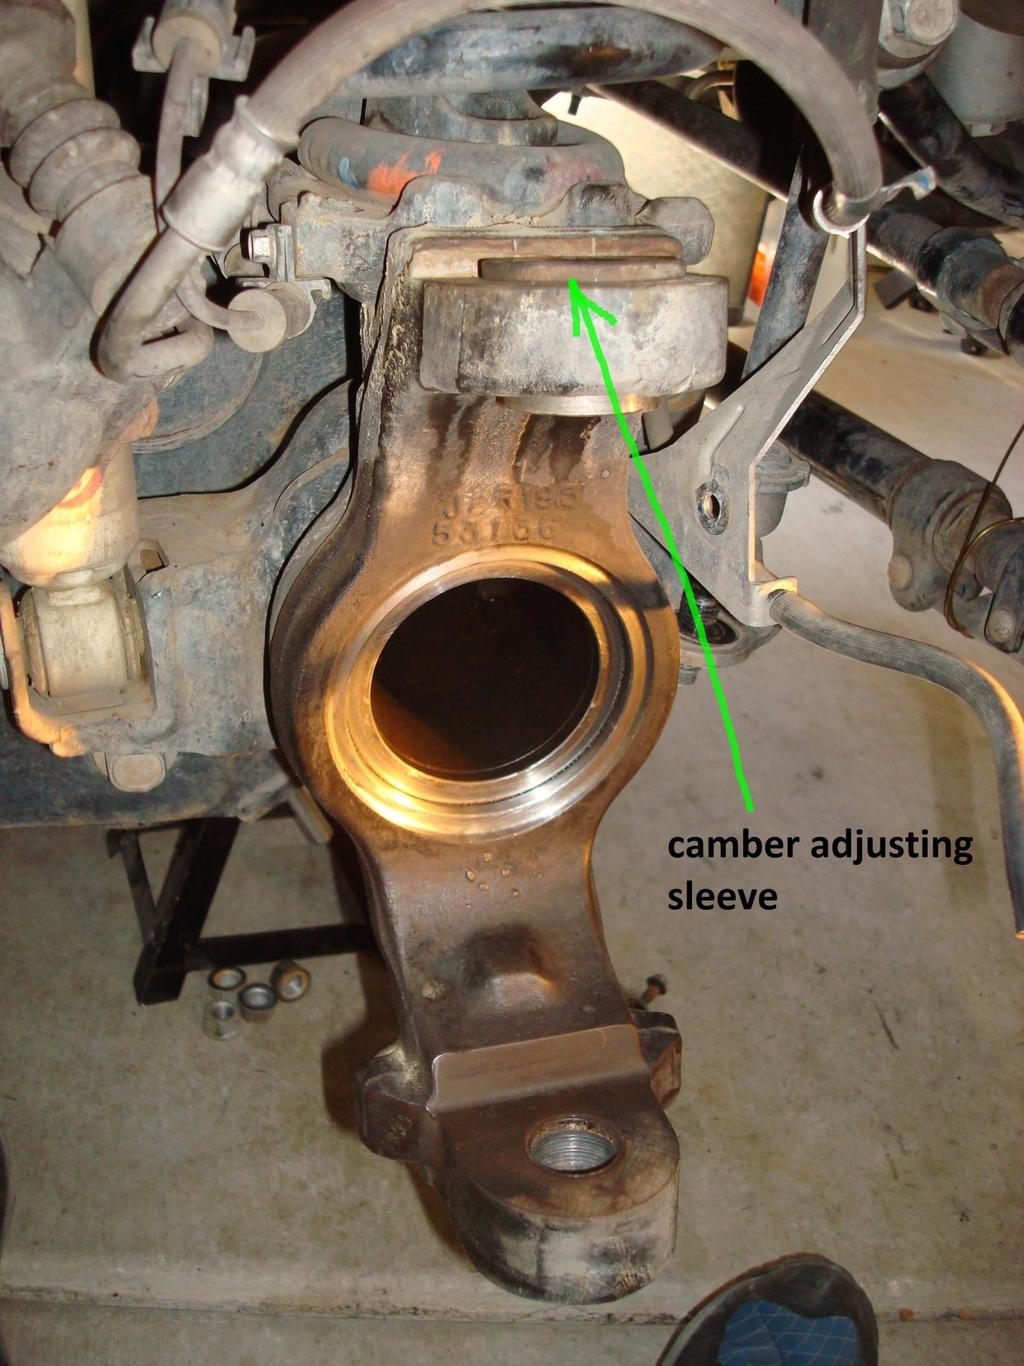 7) Loosen the nuts on the ball joint to be flush with the stud, then start whacking with the sledgehammer.